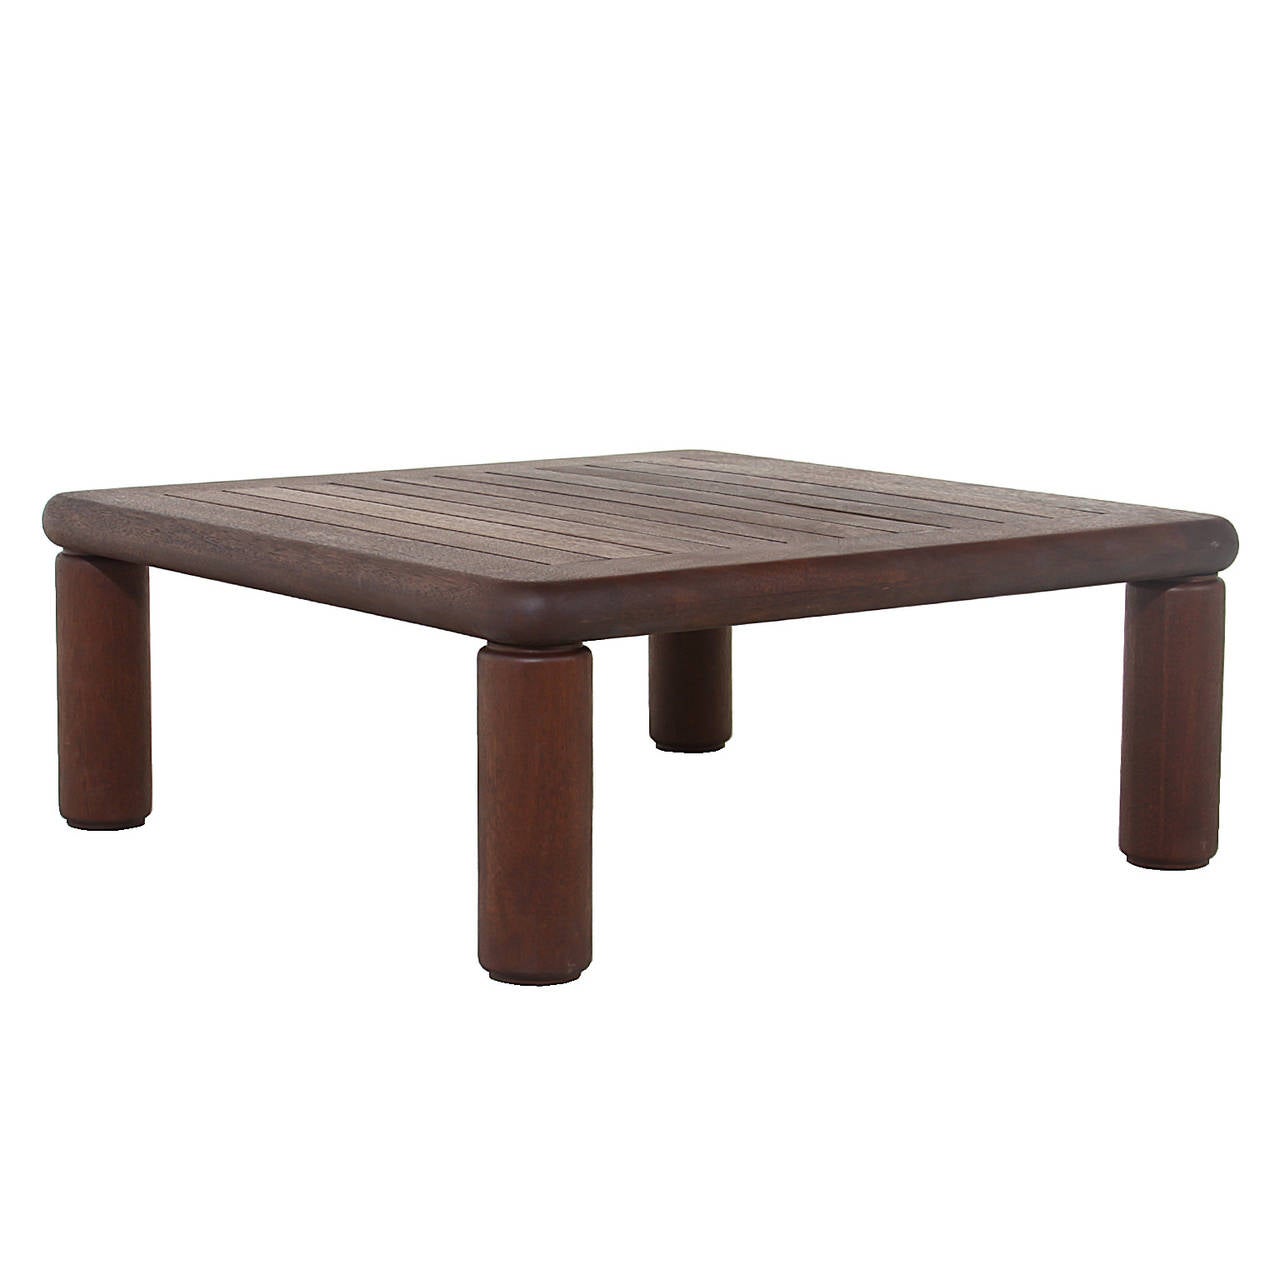 A beautiful solid Honduran Mahogany coffee table by California designer Sherill Broudy with an oil finish. There are four solid wood legs that are rounded in shape and the top is slatted creating a beautiful design element. Sherrill Broudy was one